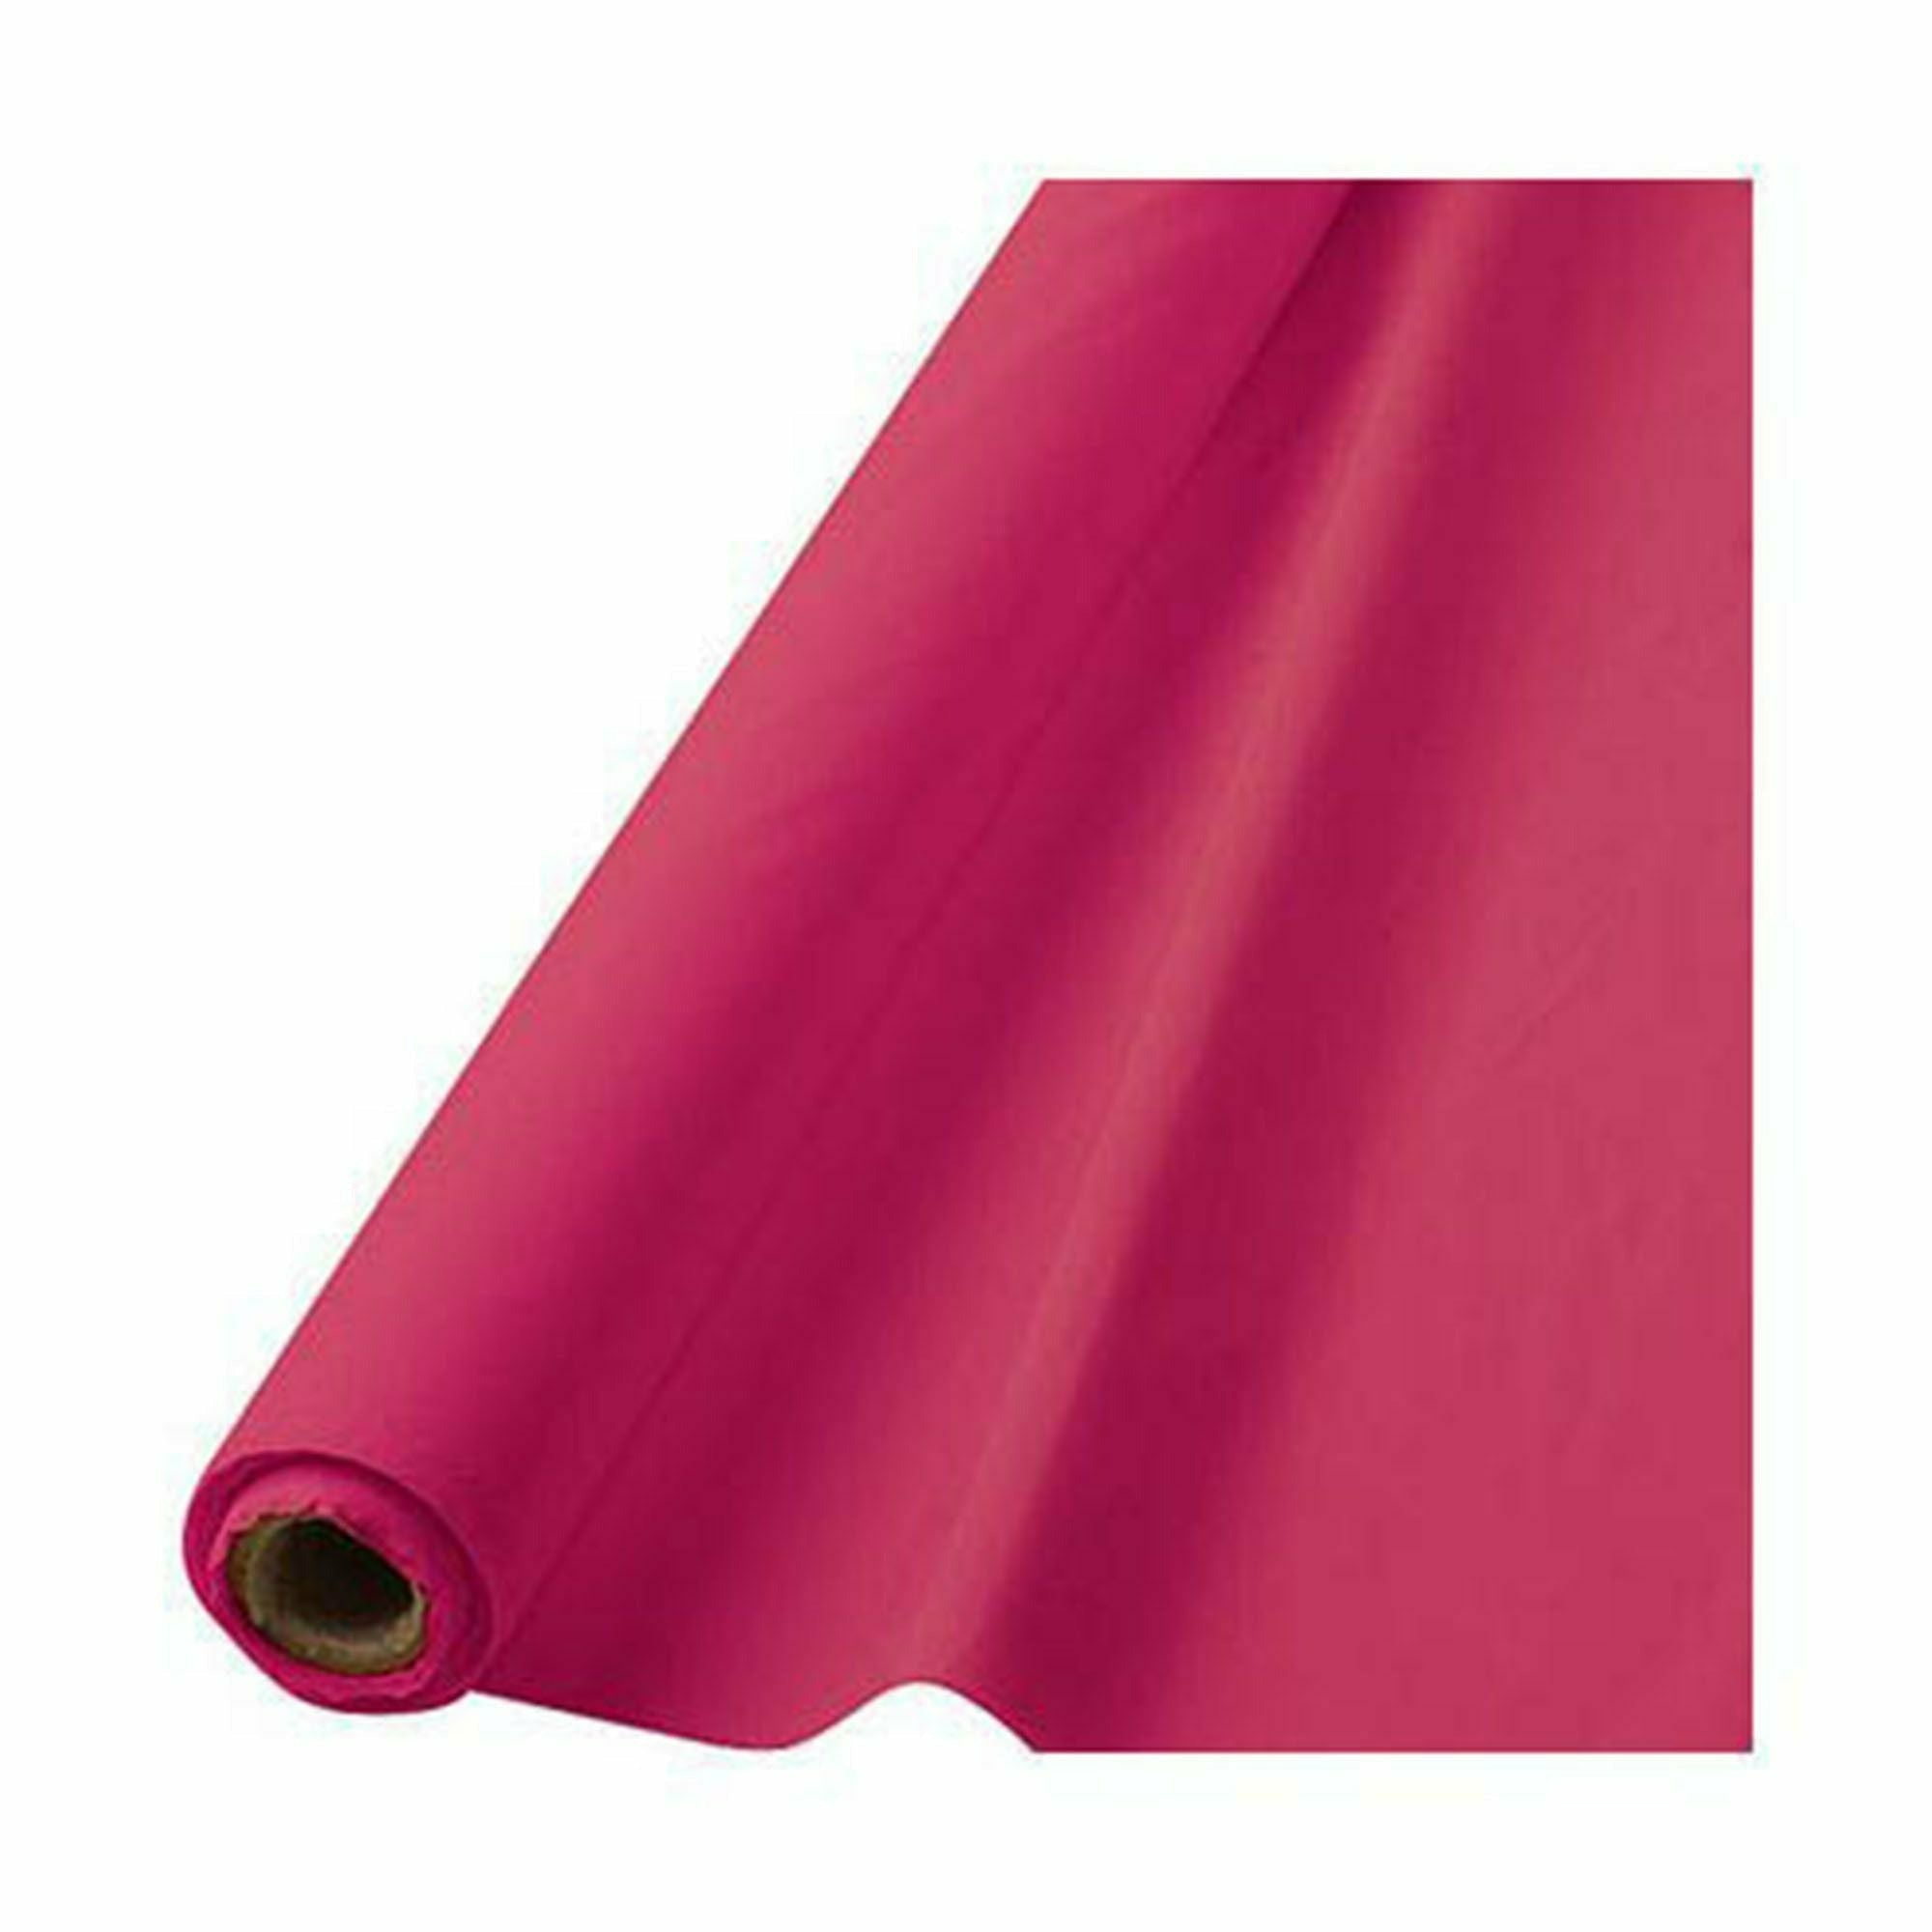 Amscan BASIC Bright Pink Plastic Table Cover Roll